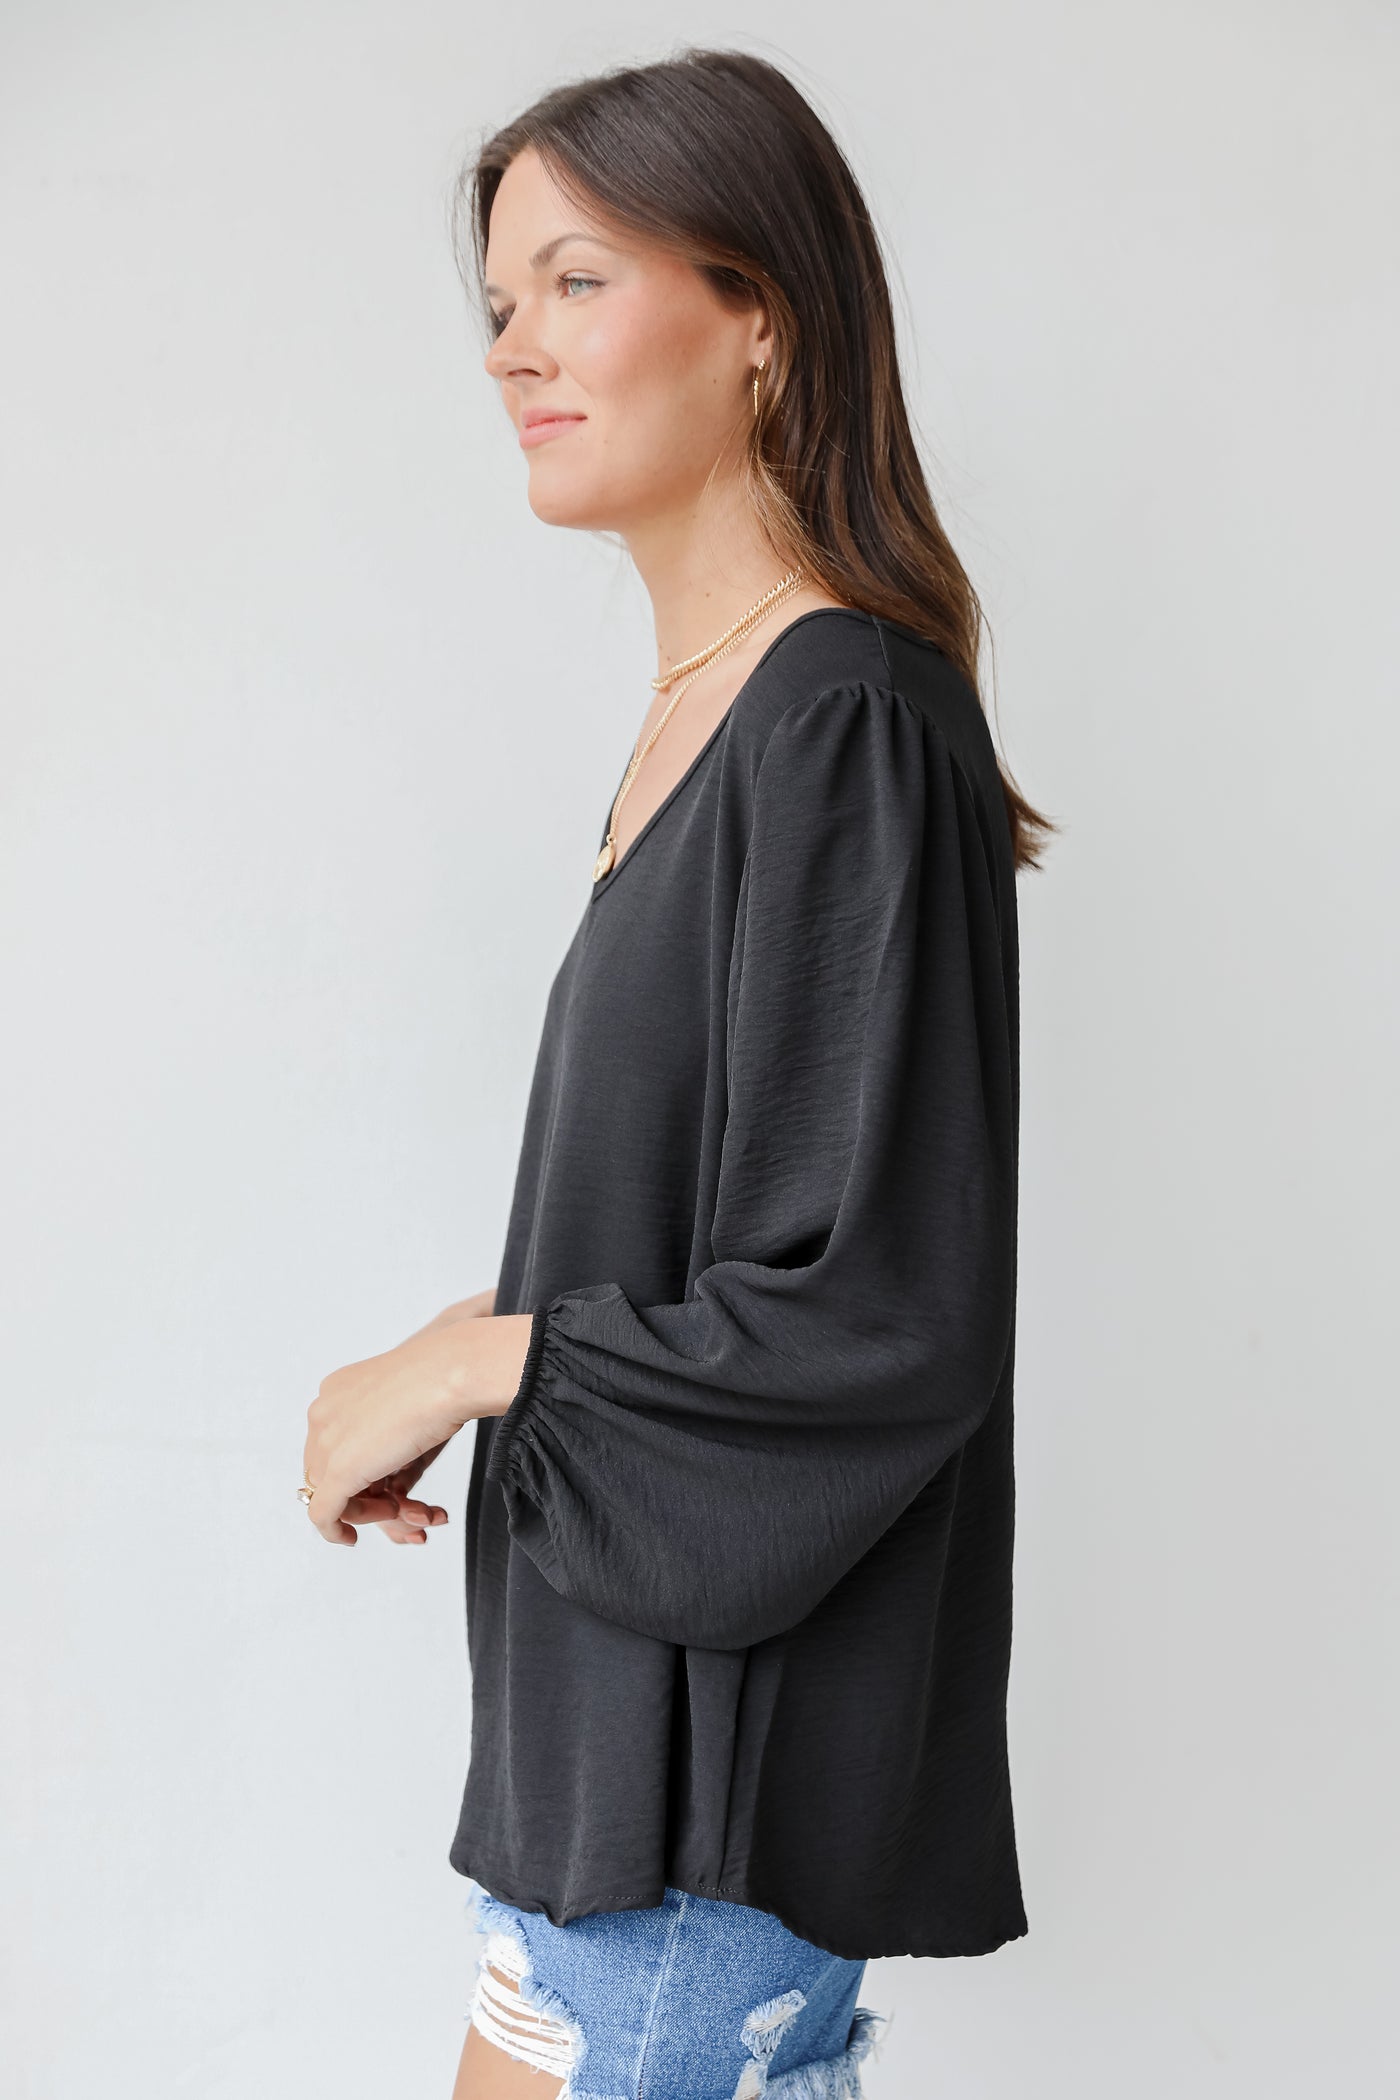 Blouse in black side view